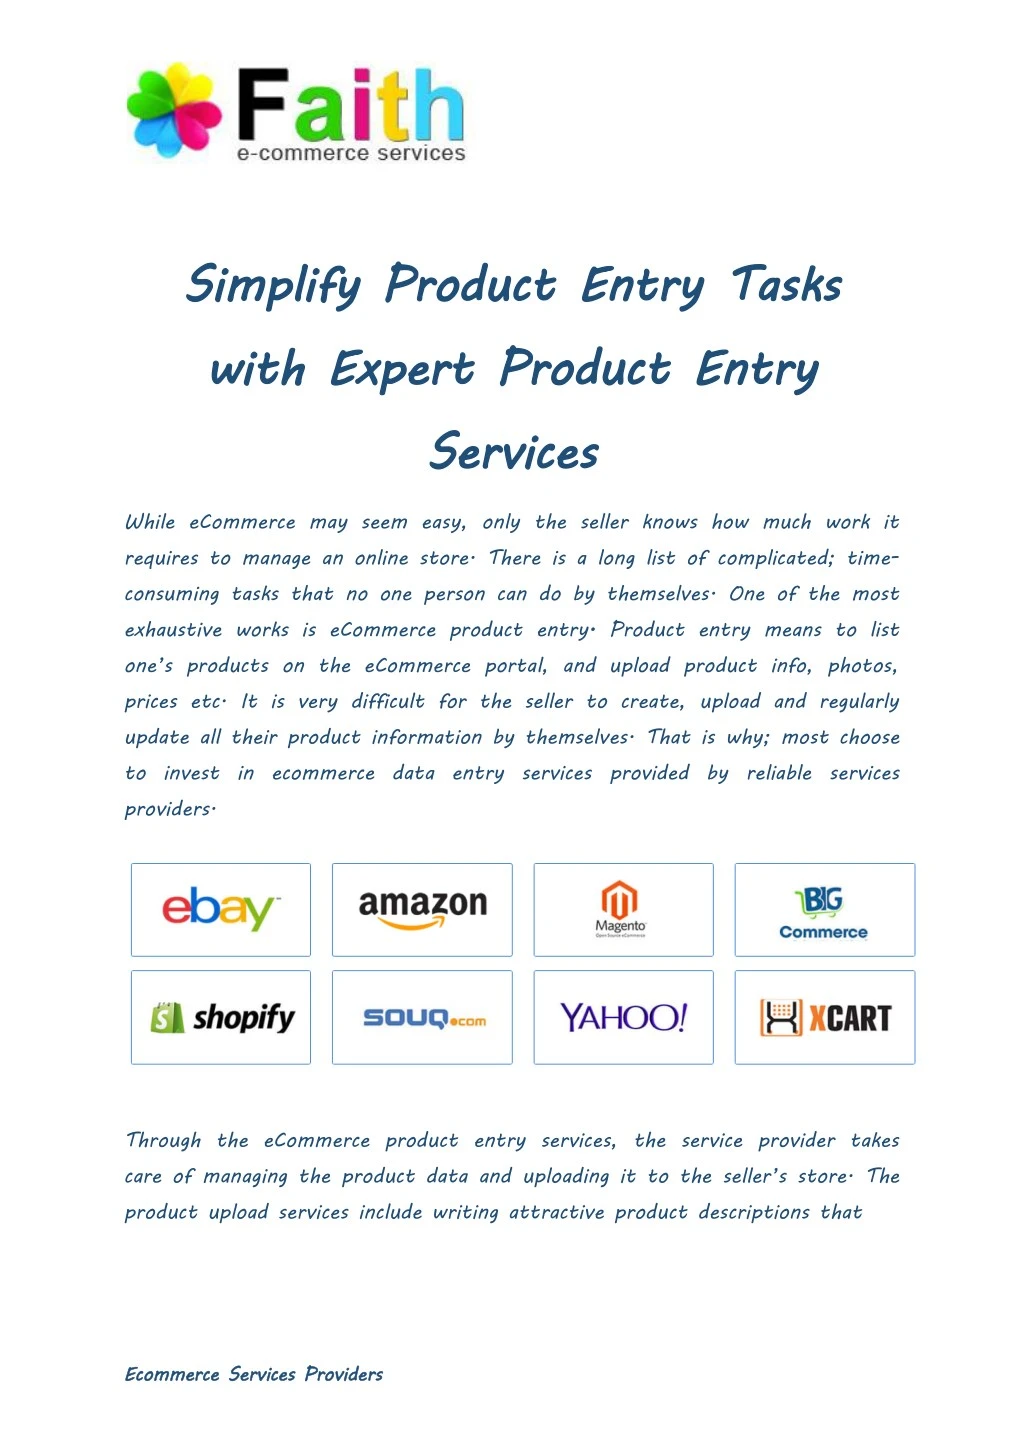 simplify with expert product entry services